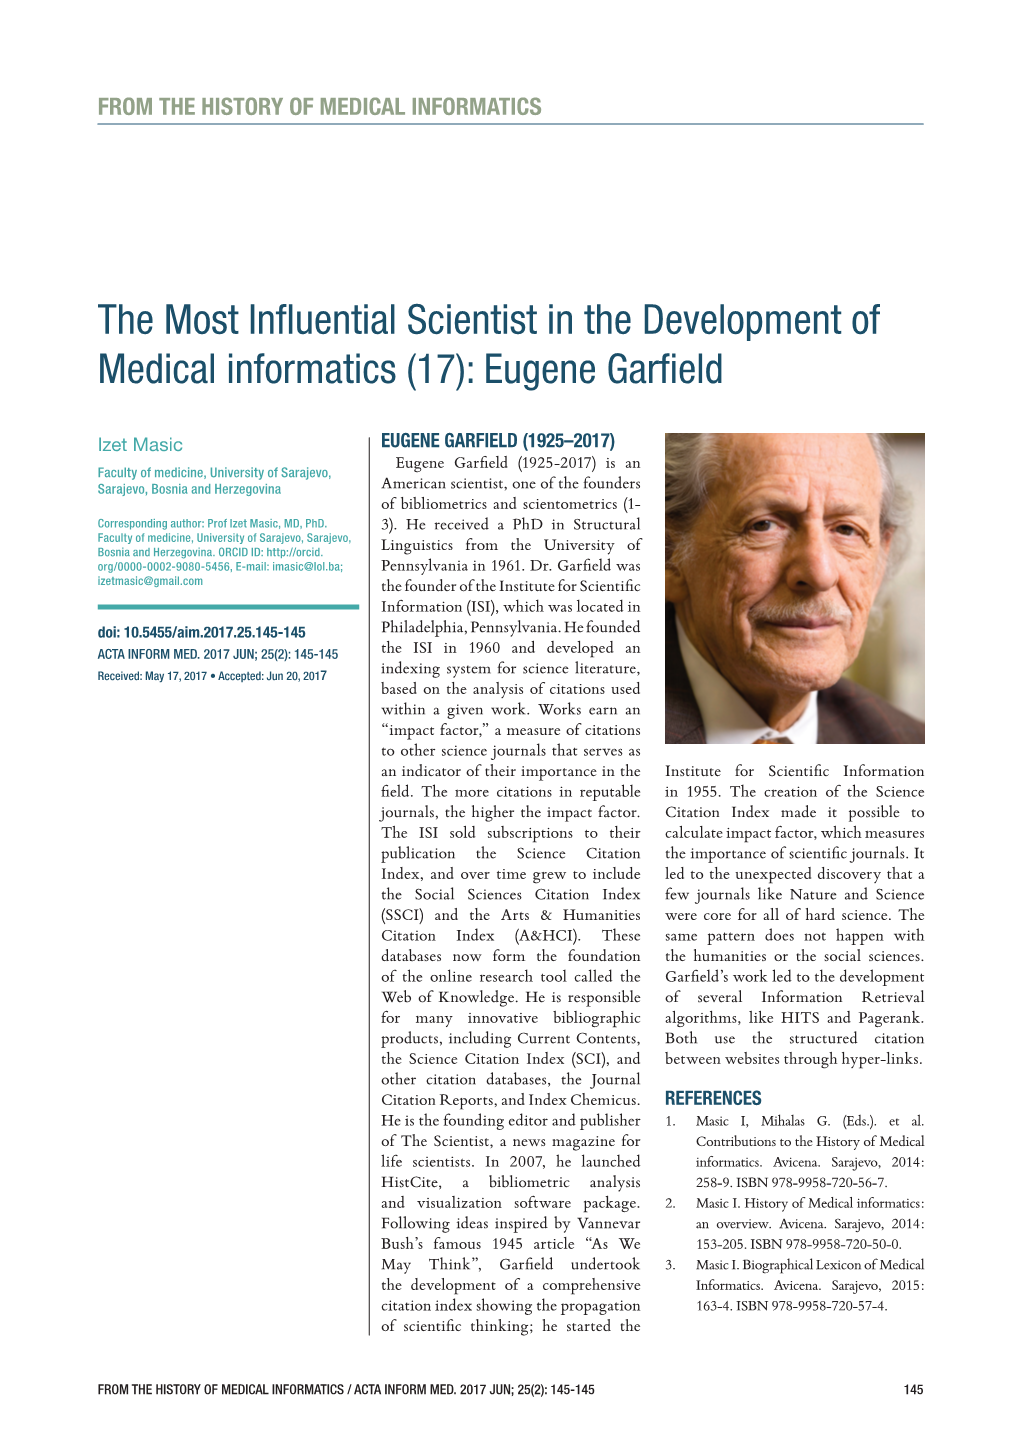 The Most Influential Scientist in the Development of Medical Informatics (17): Eugene Garfield